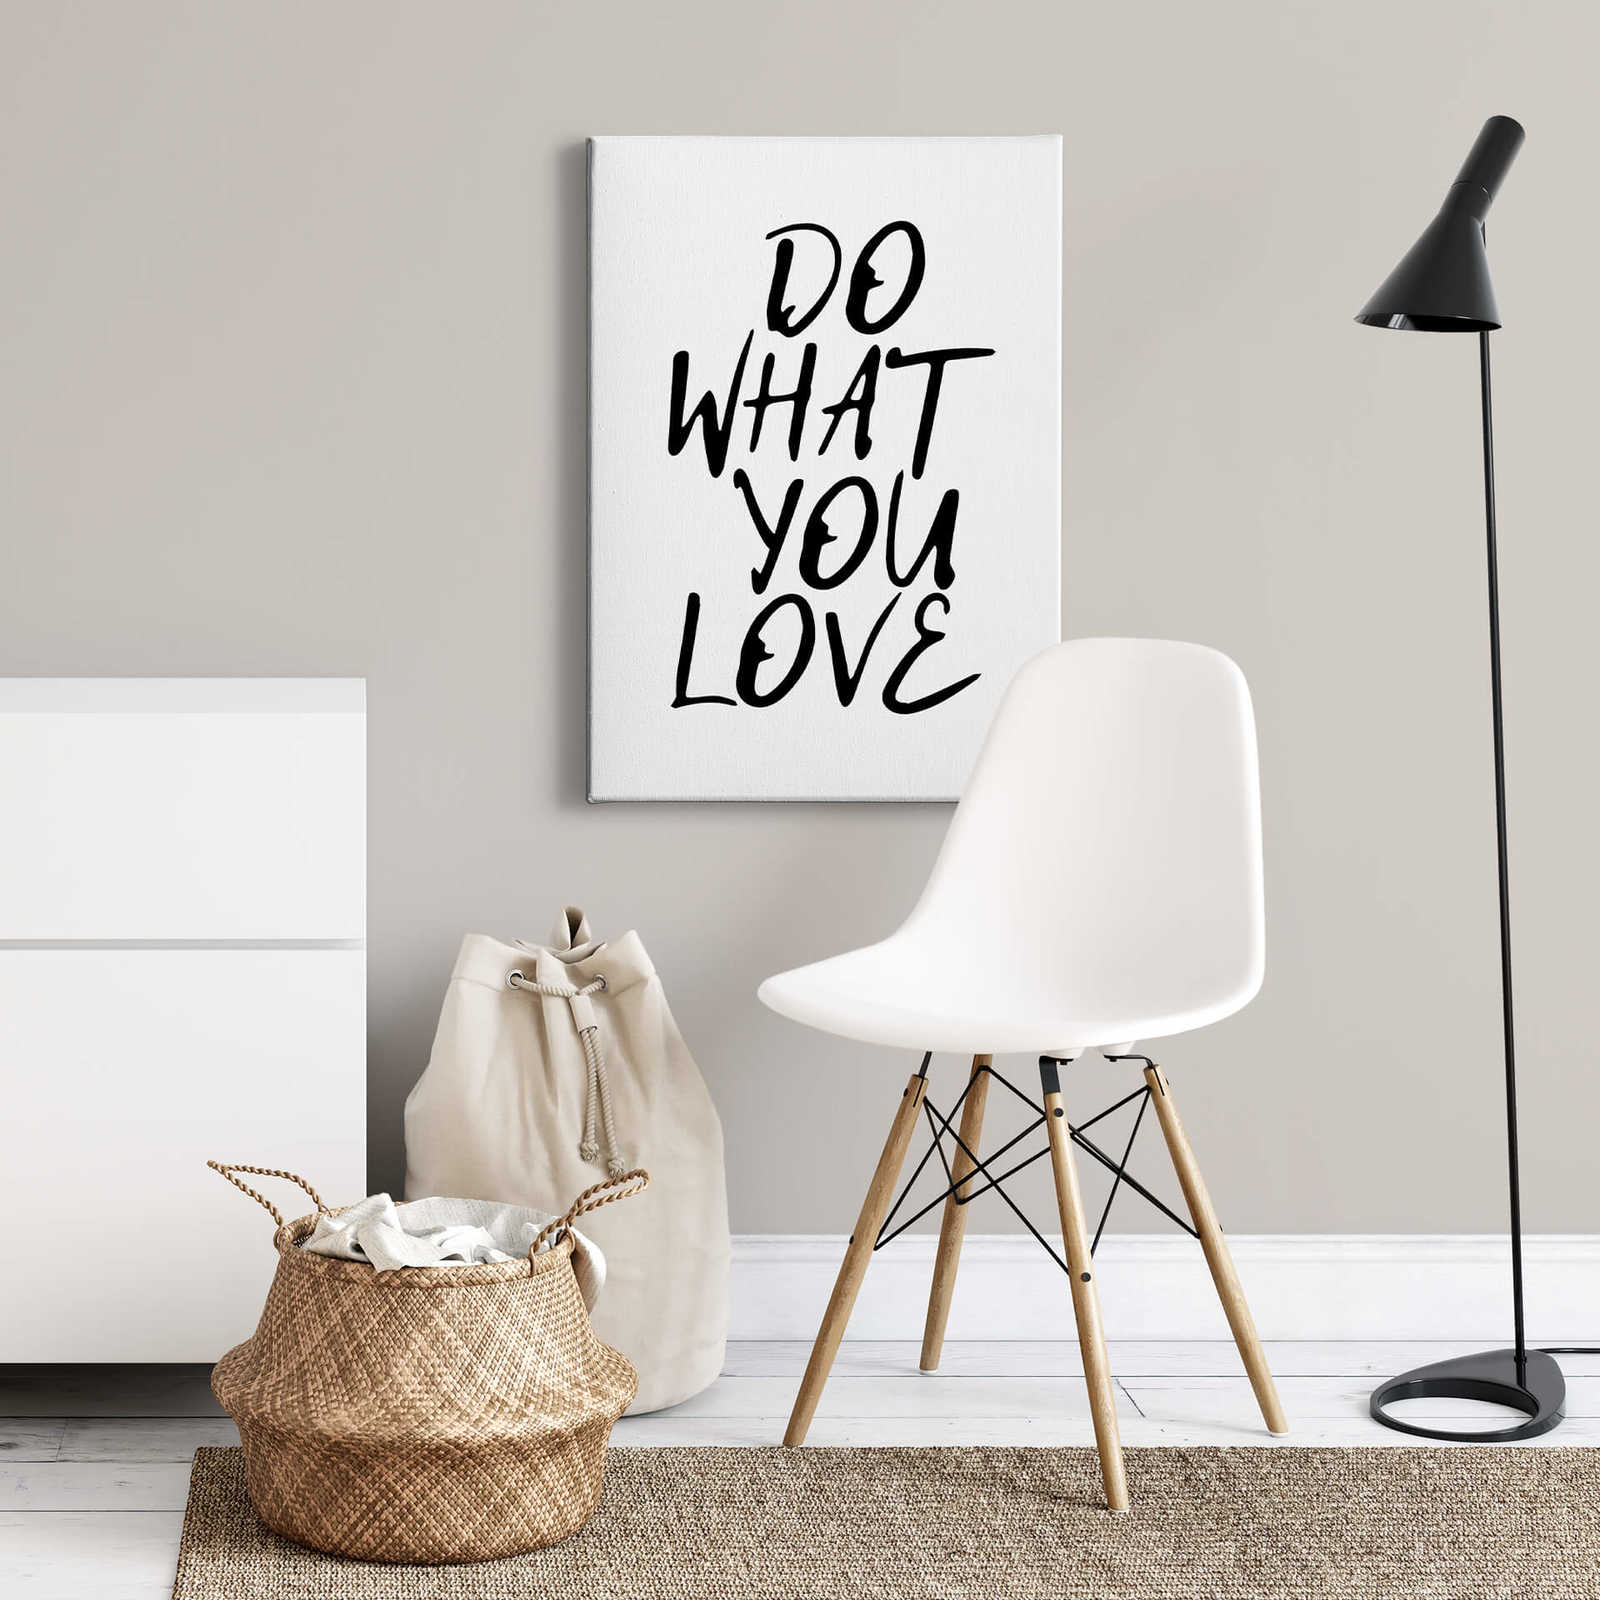             Tableau toile Slogan do what you love - 0,50 m x 0,70 m
        